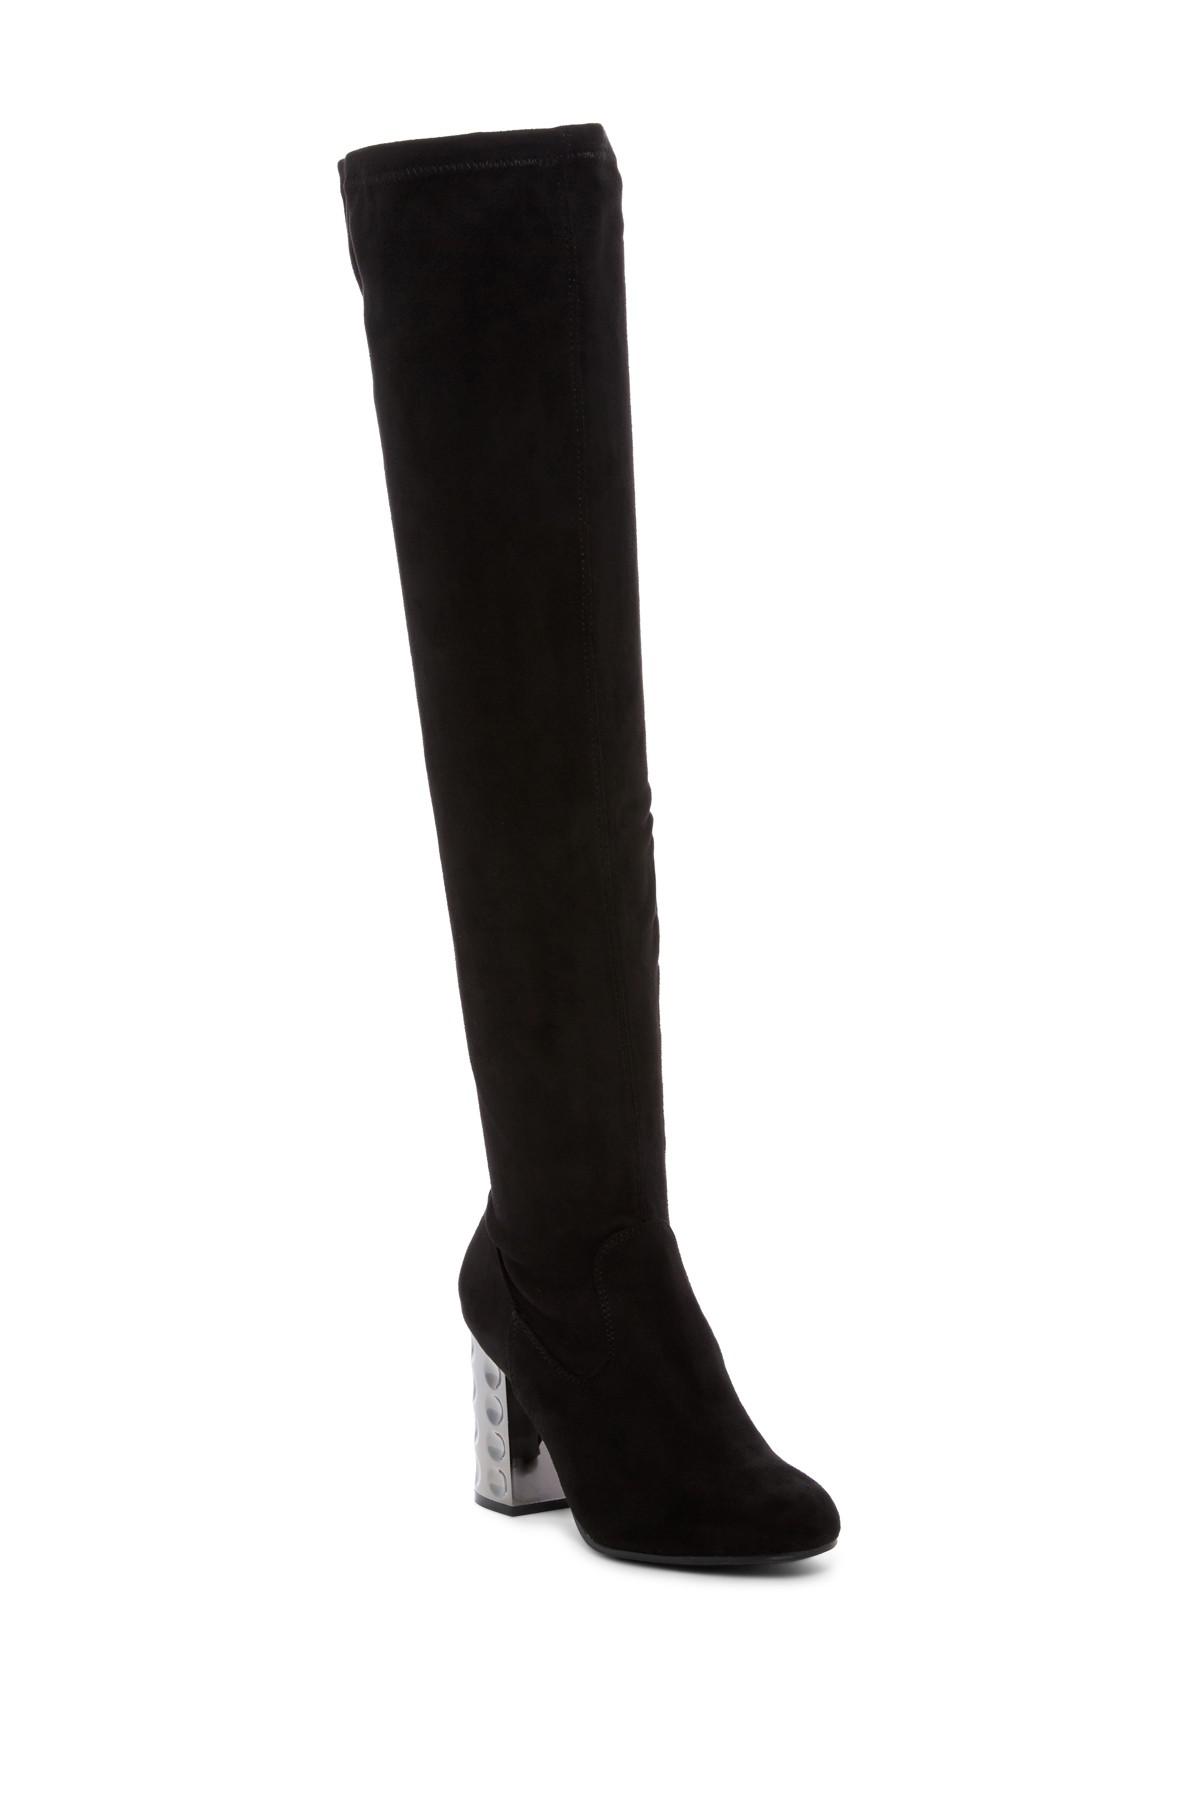 Lyst - Carlos By Carlos Santana Quantum Over-the-knee Boot in Black